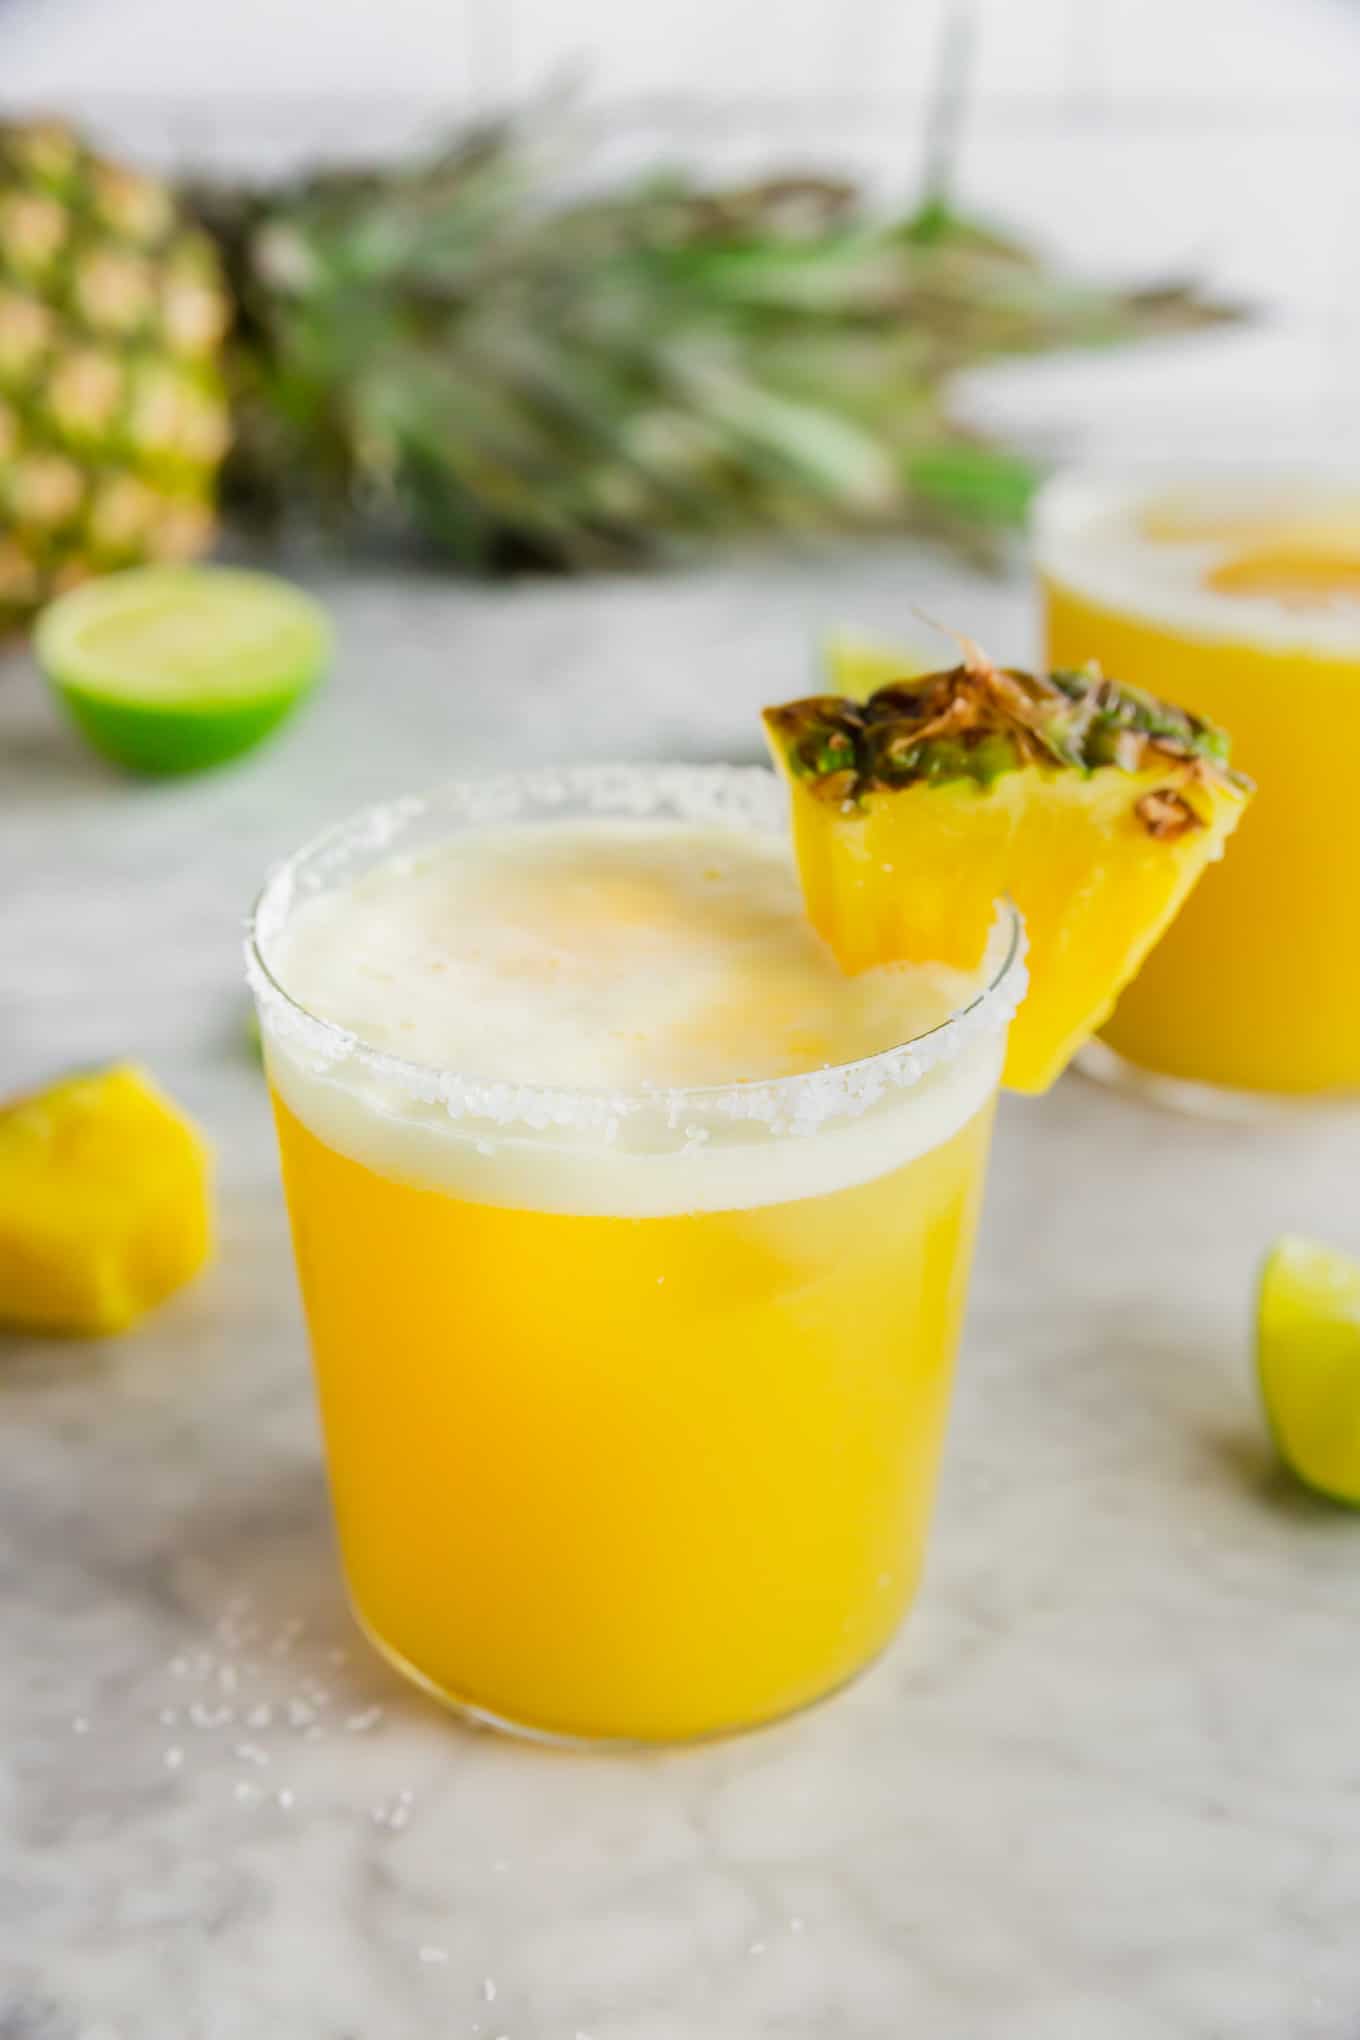 A photo of a glass filled with pineapple margarita with a wedge of fresh pineapple and lime.